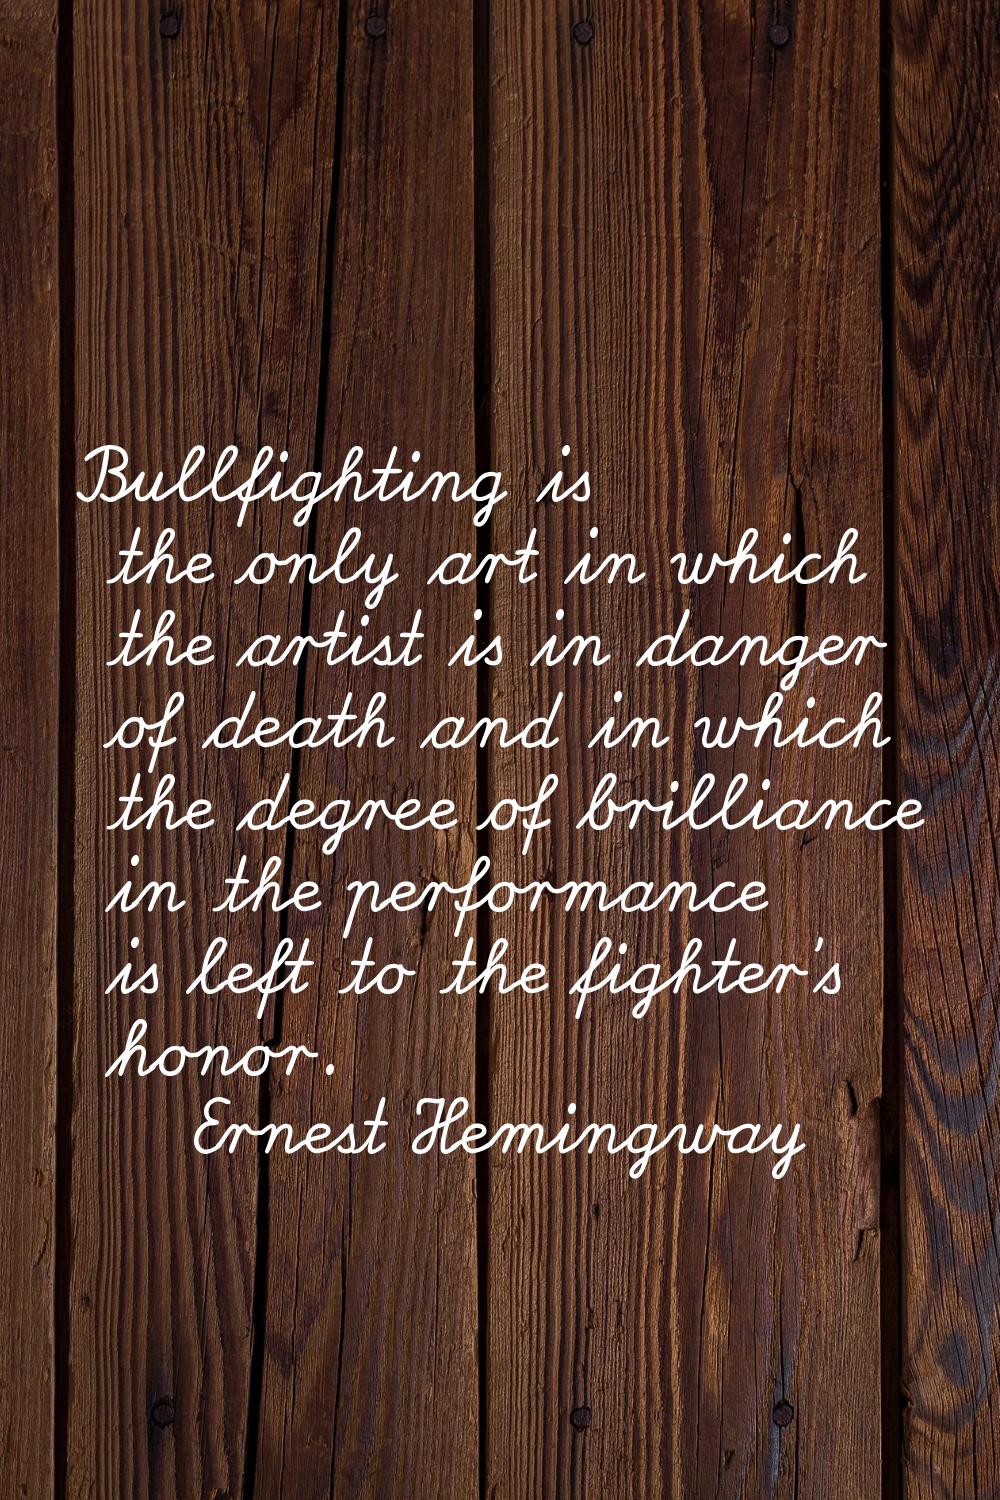 Bullfighting is the only art in which the artist is in danger of death and in which the degree of b